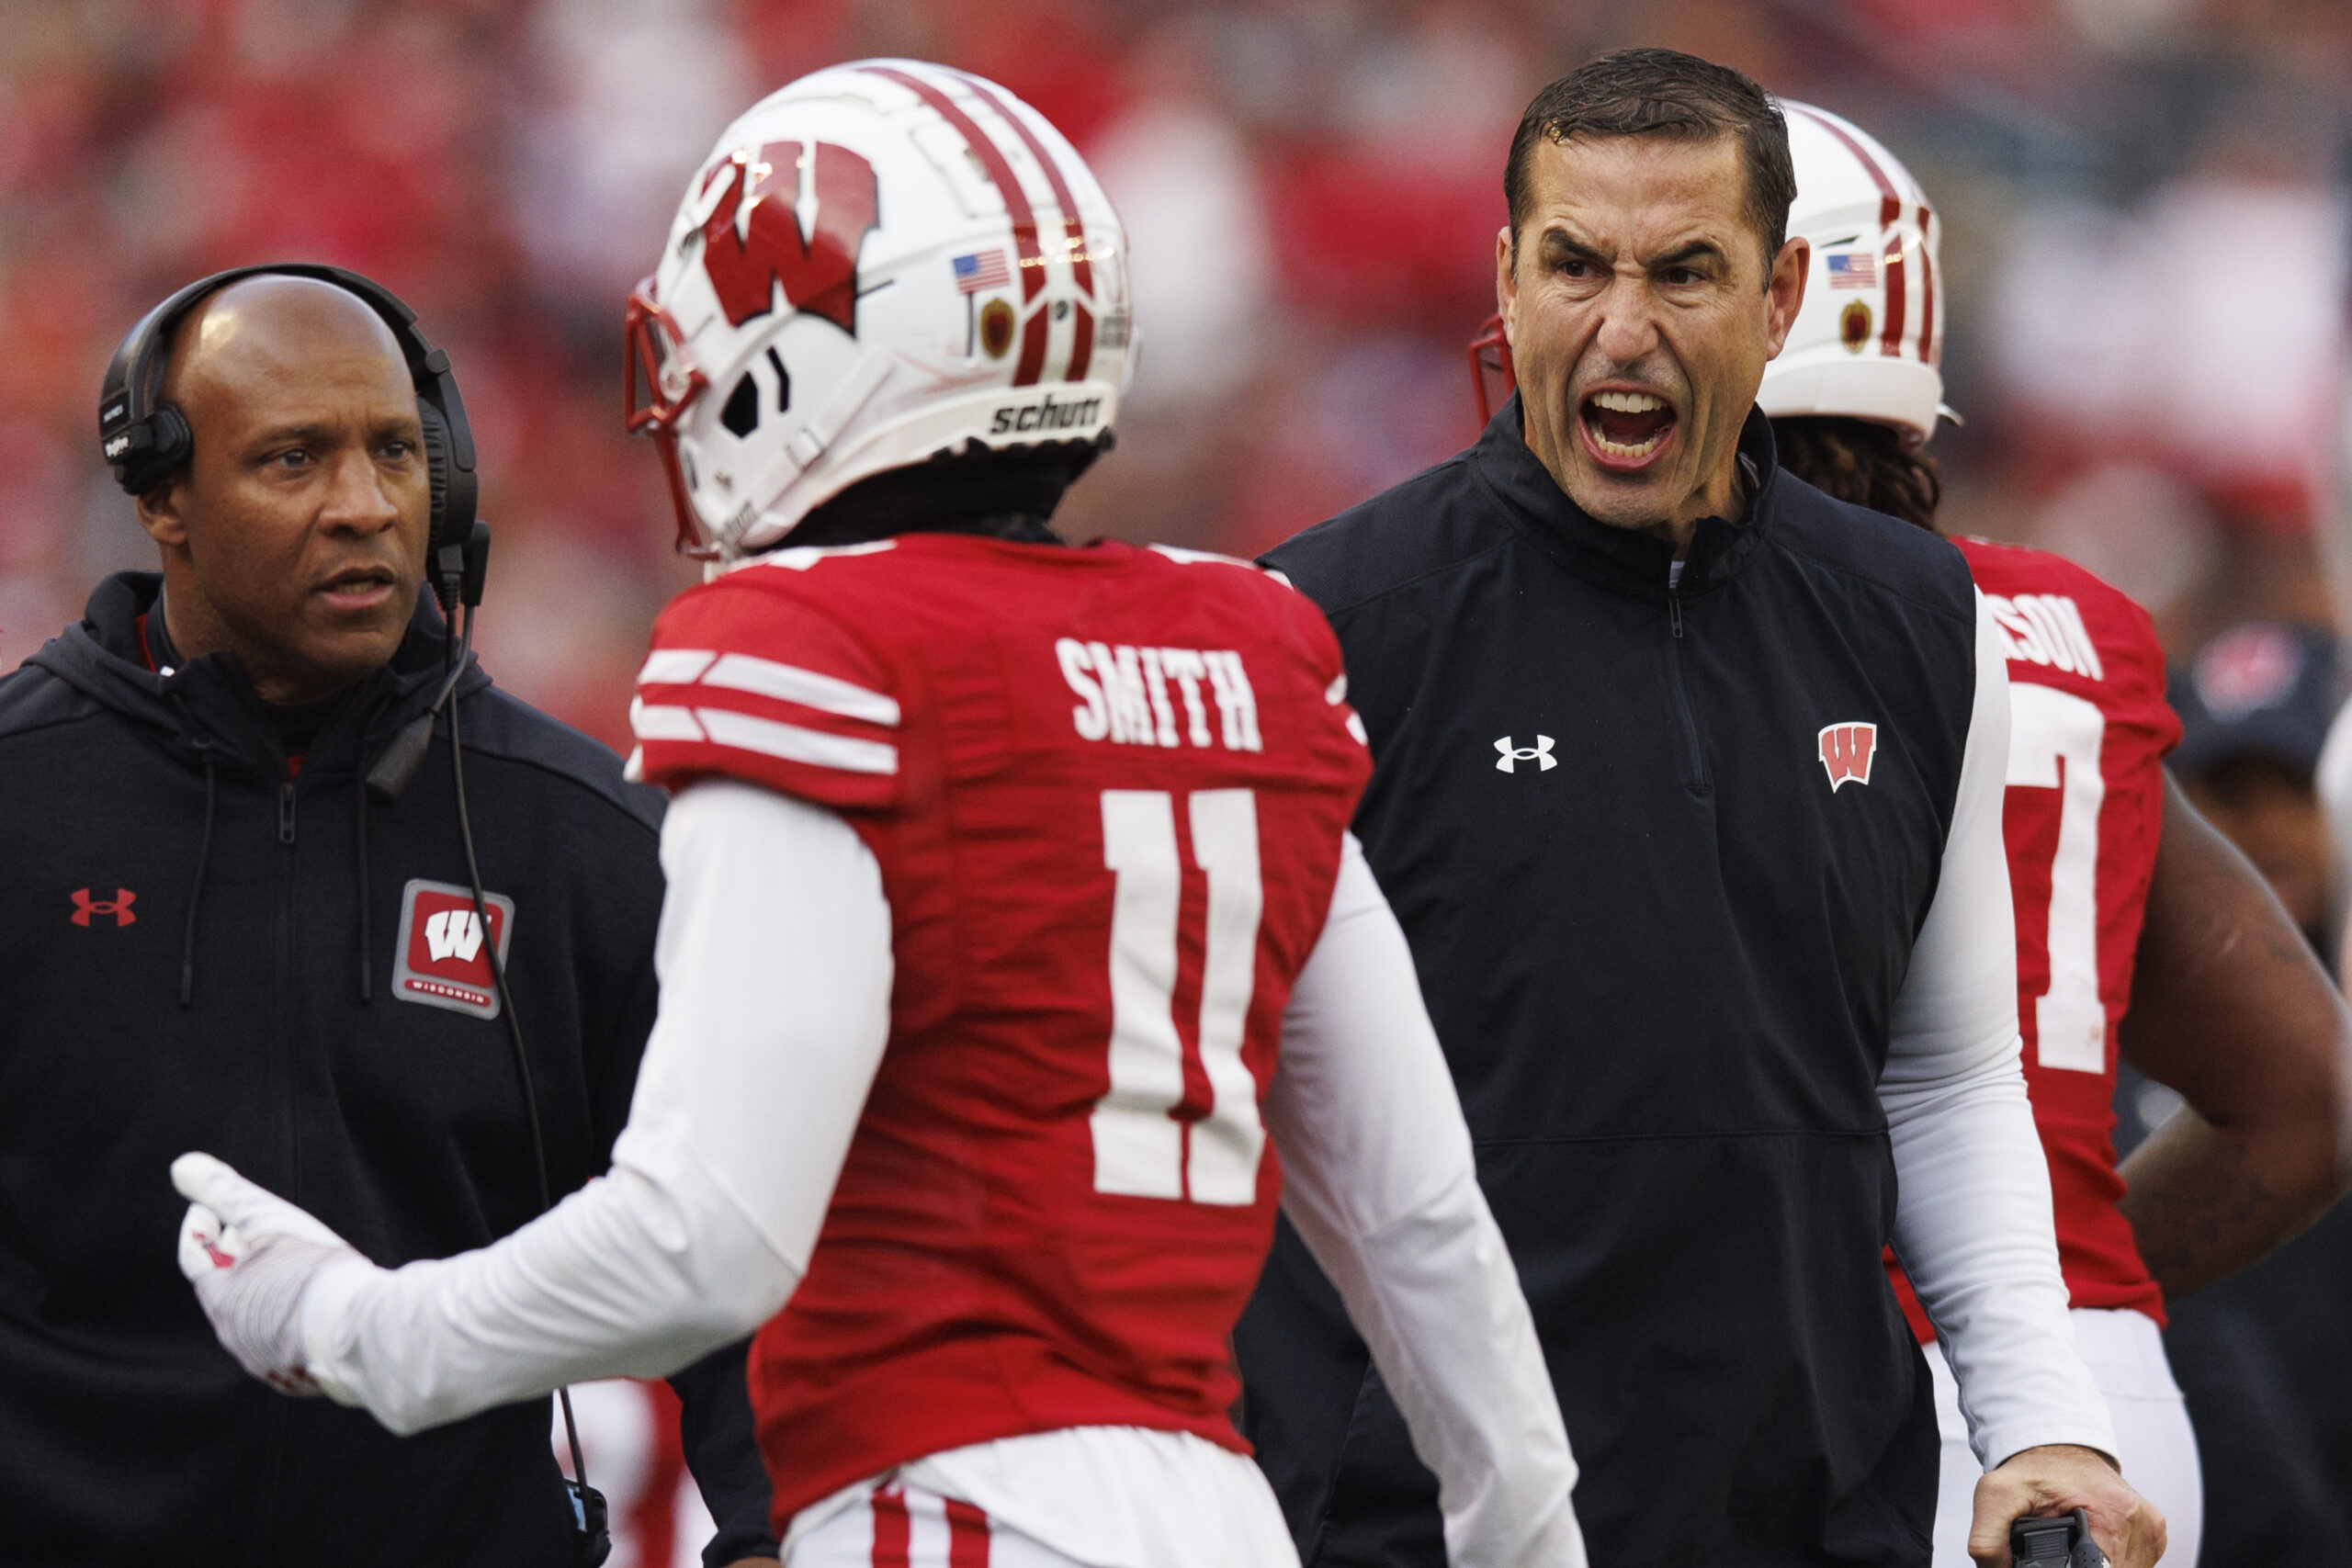 Wisconsin Badgers football head coach Luke Fickell loses to Northwestern at home